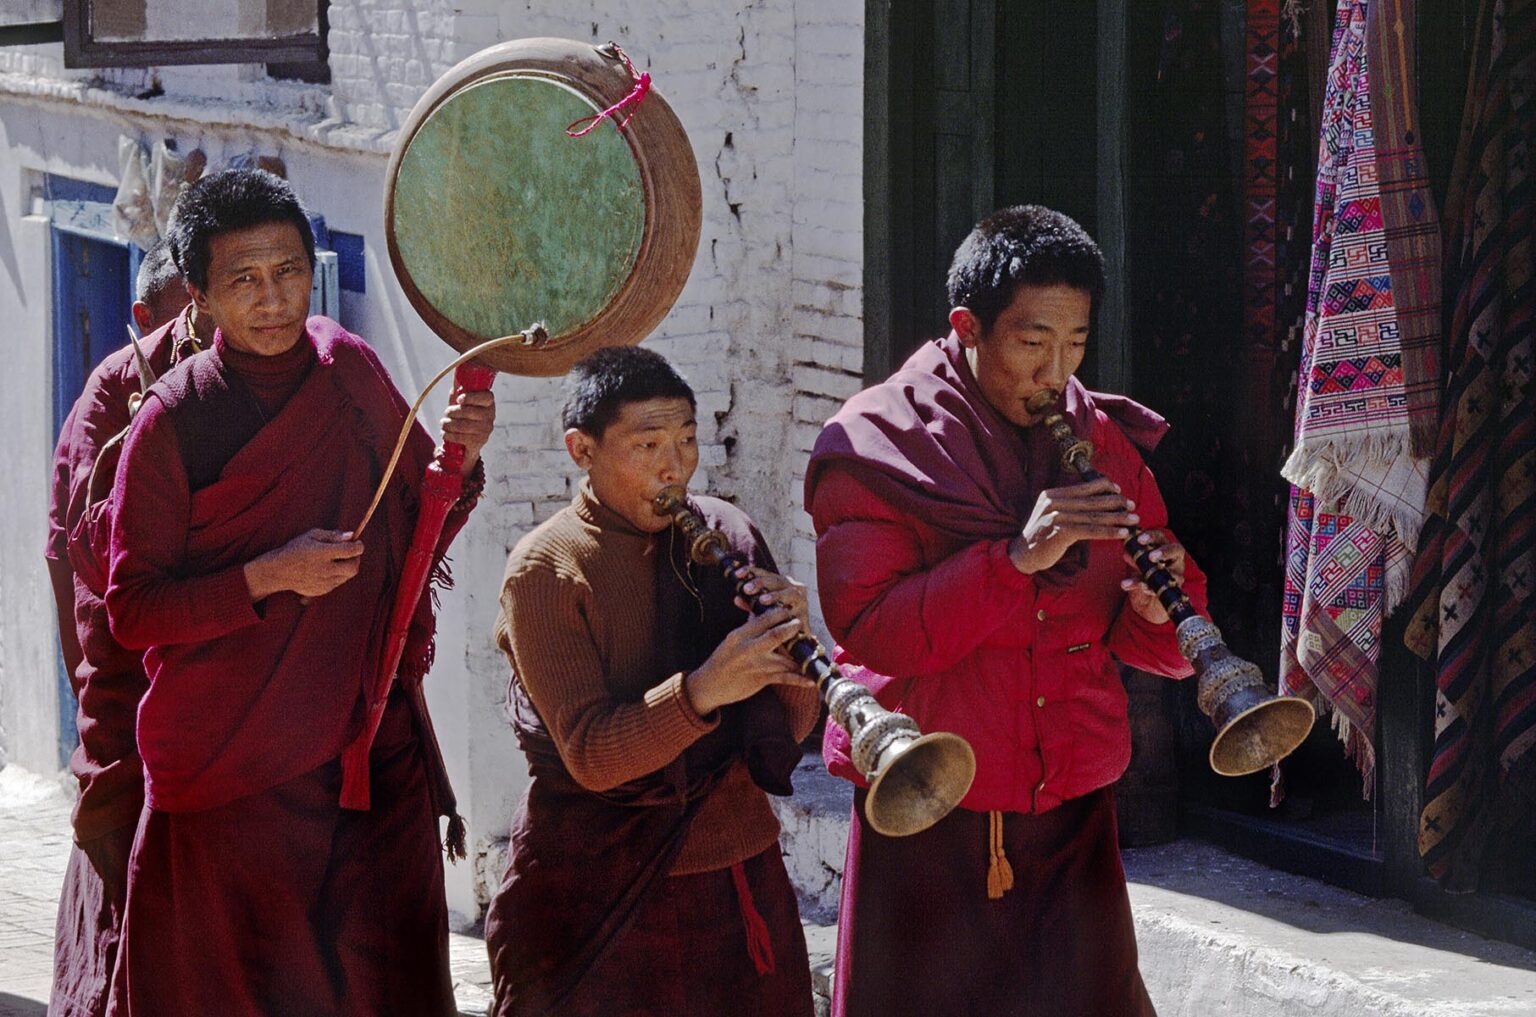 Tibetan Buddhist monks play musical instruments as they parade around Bodhanath Stupa in a religious festival